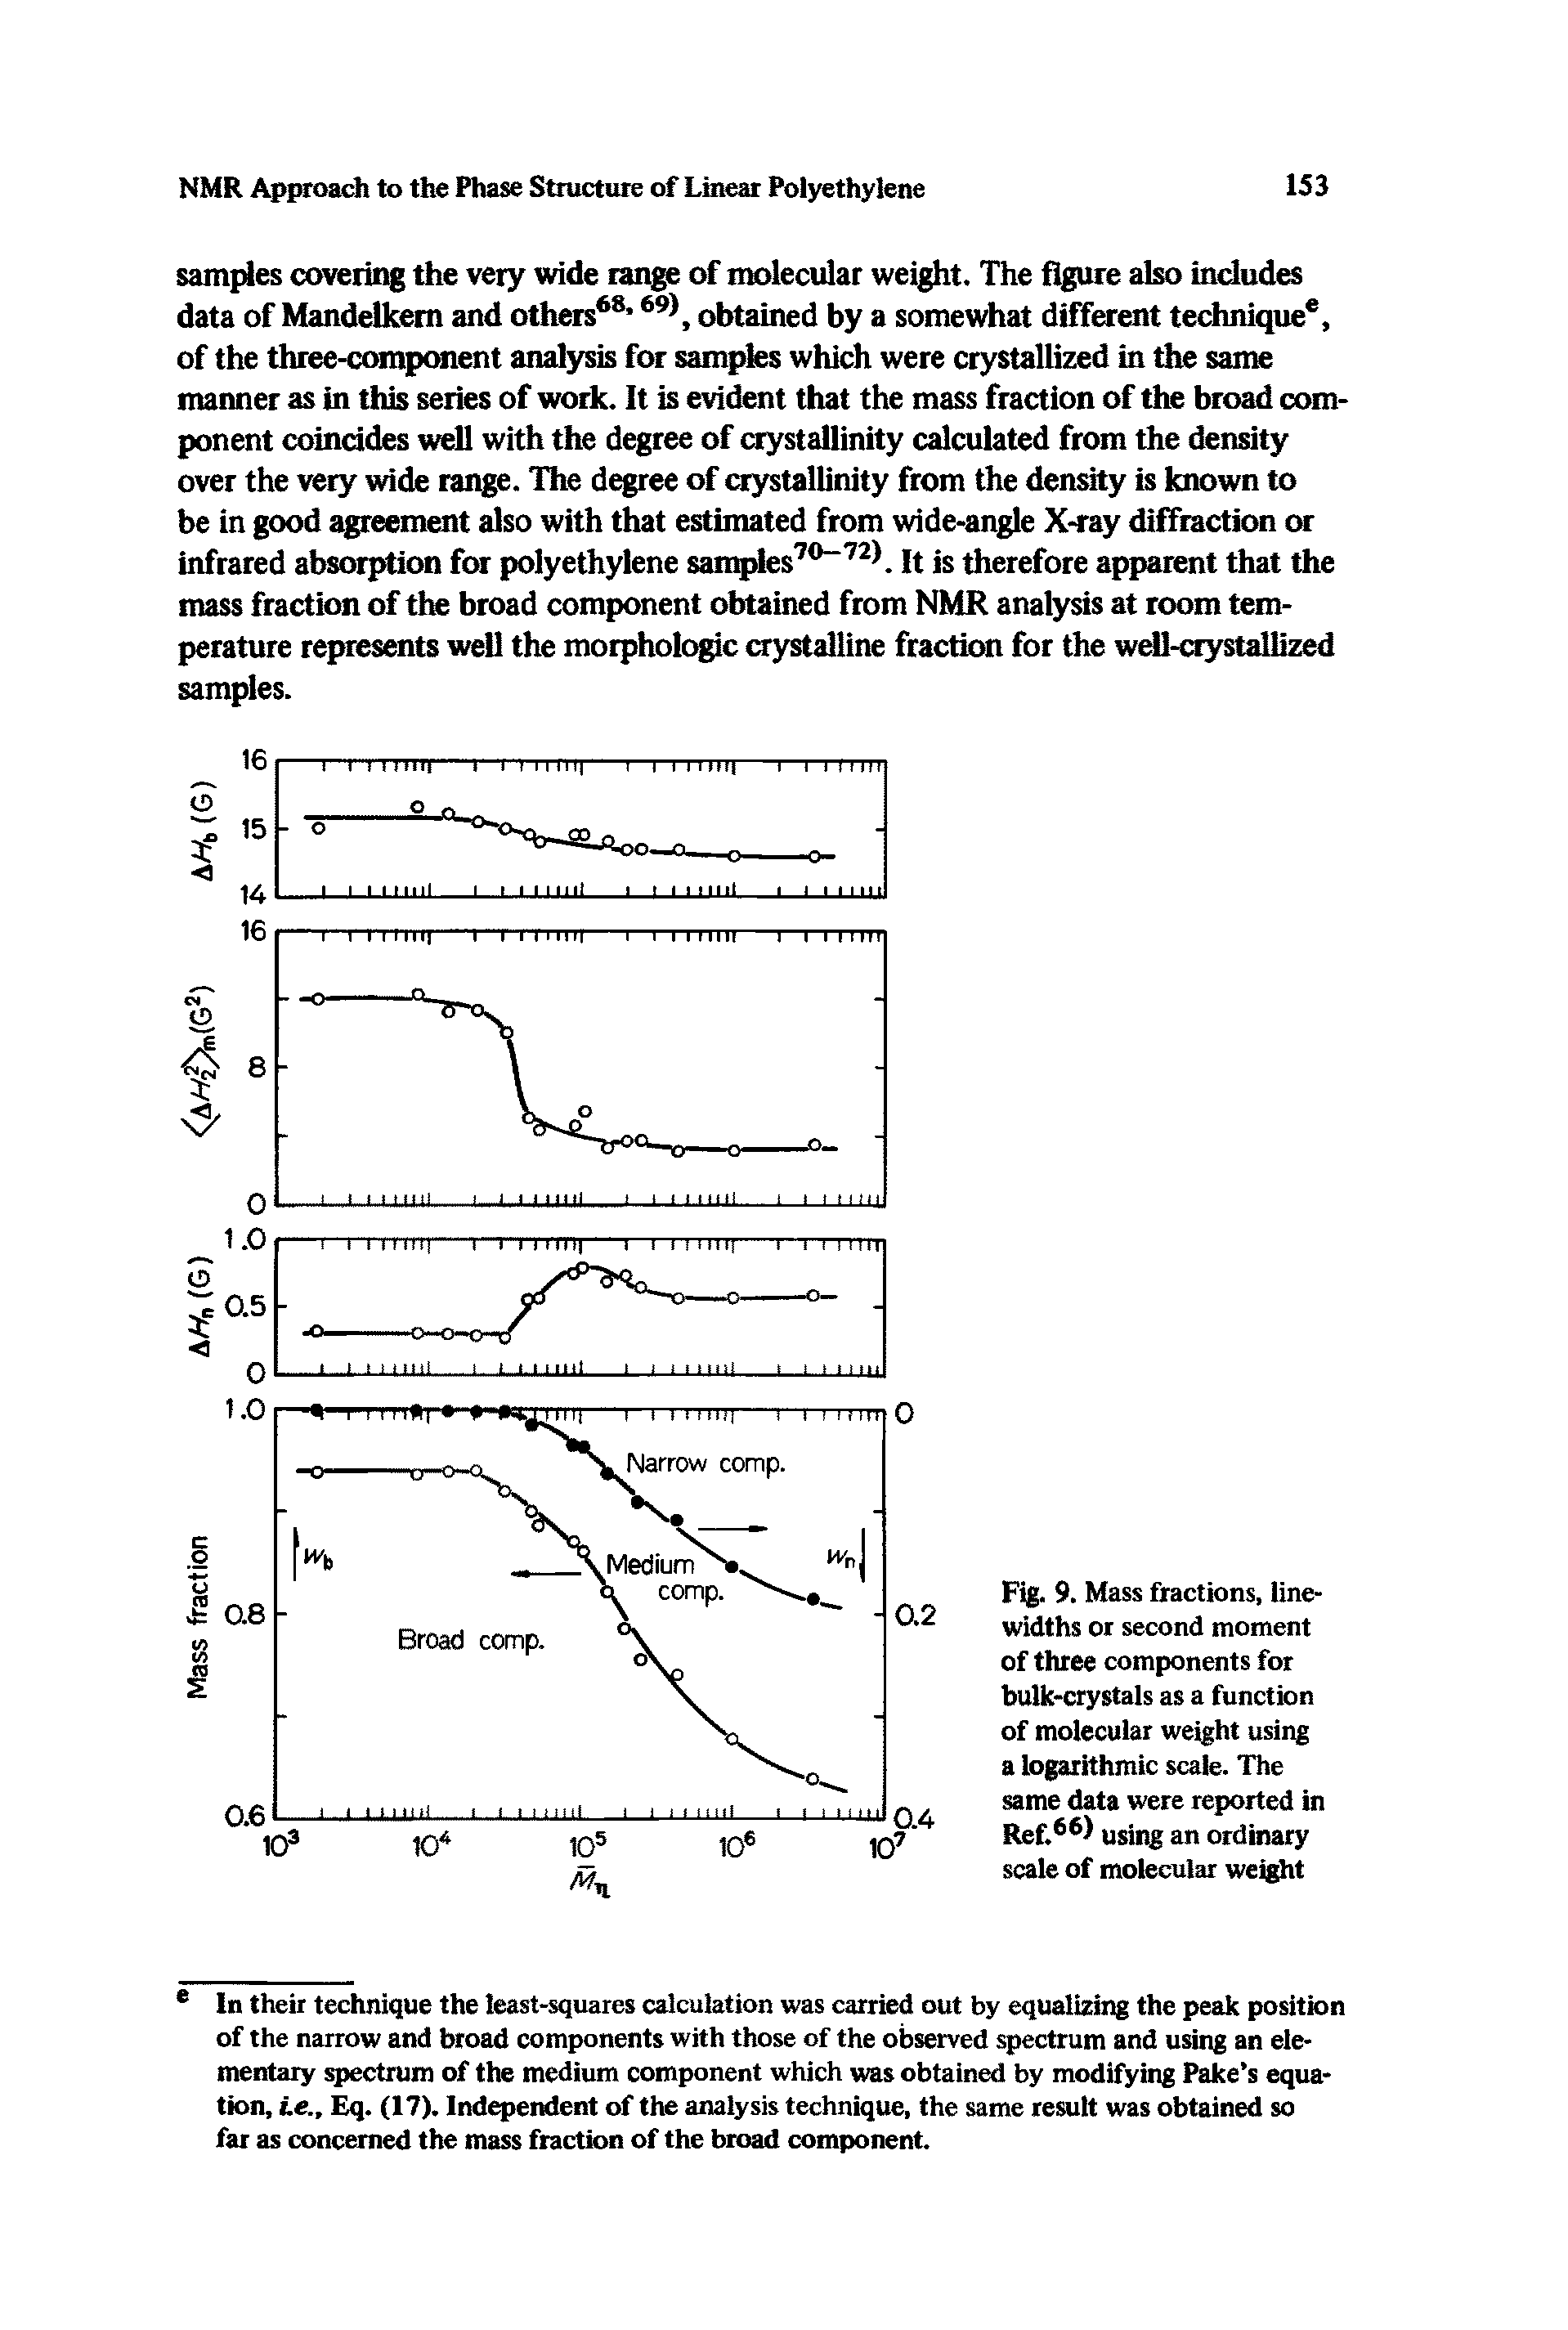 Fig. 9. Mass fractions, line-widths or second moment of three components for bulk-crystals as a function of molecular weight using a logarithmic scale. The same data were reported in Ref.66 using an ordinary scale of molecular weight...